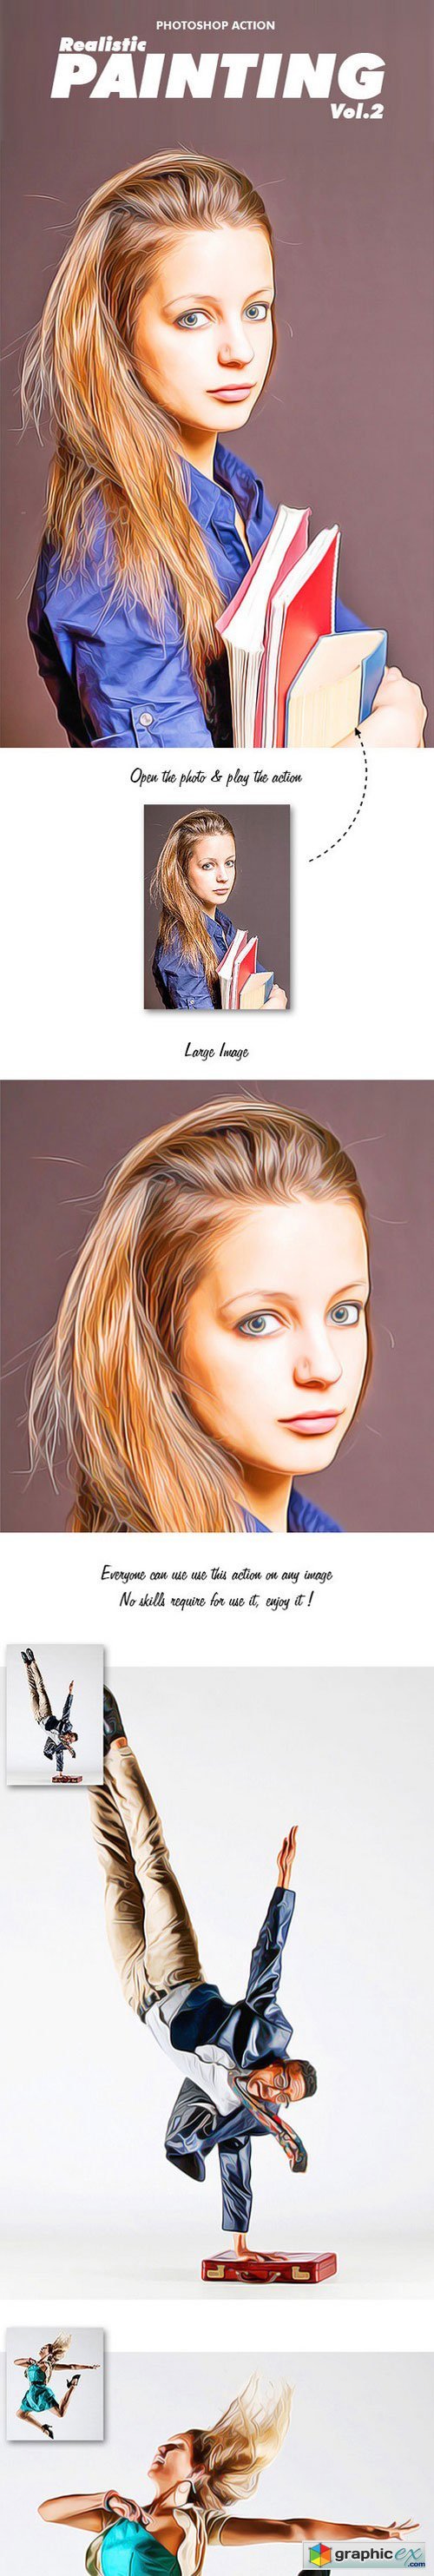 Realistic Painting Vol2 Photoshop Action